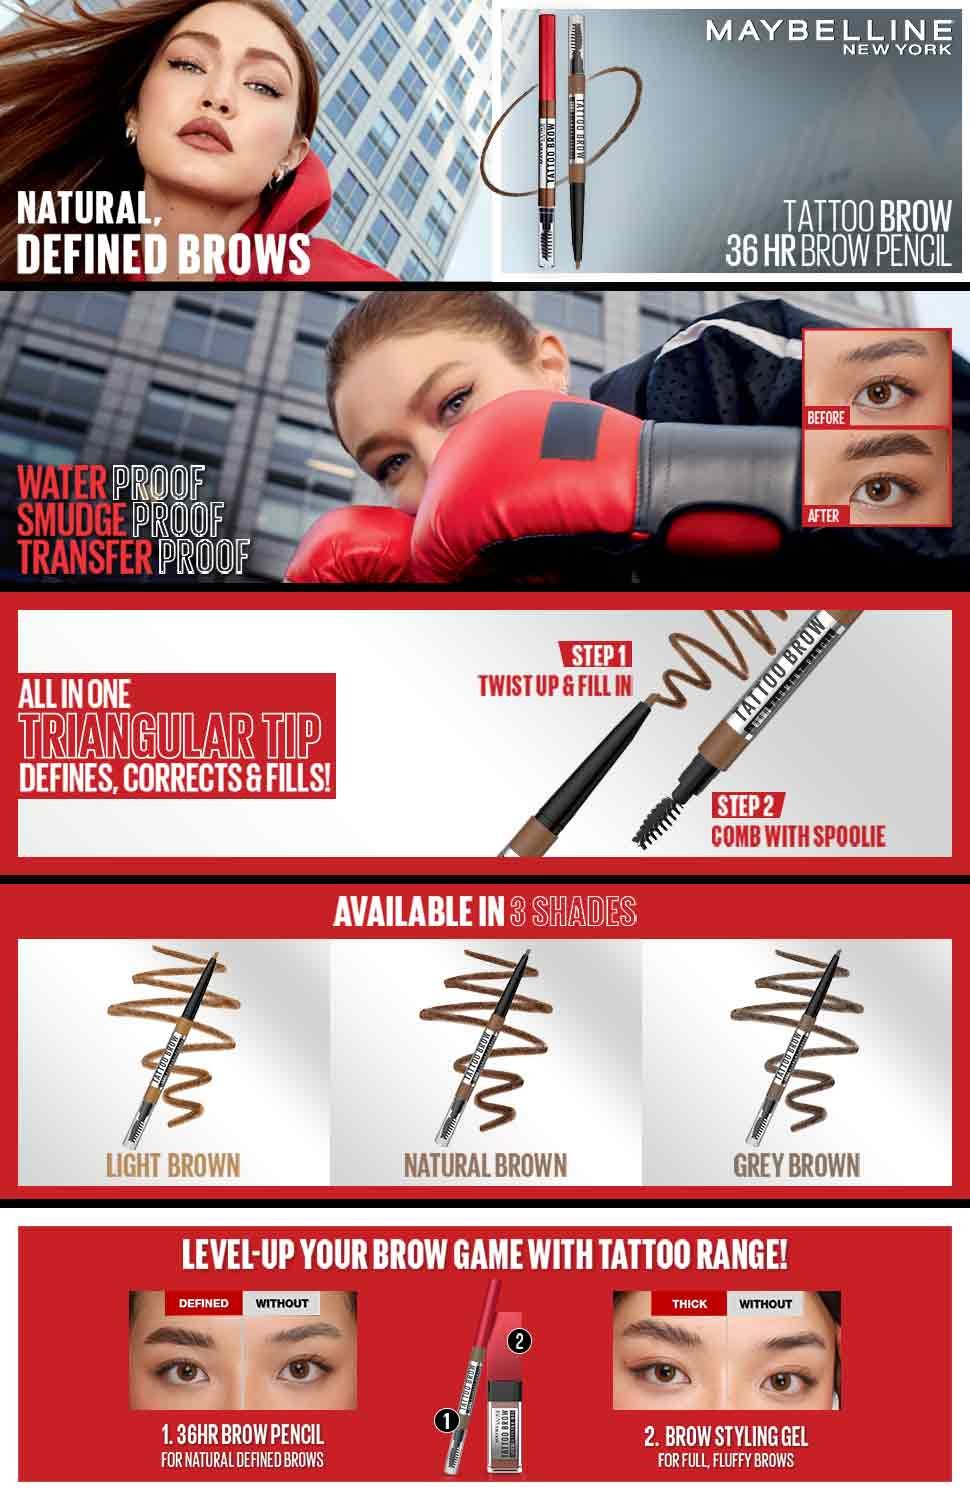 Buy Maybelline Tattoo Brow Up To 36Hr Brow Pencil - Maybelline India